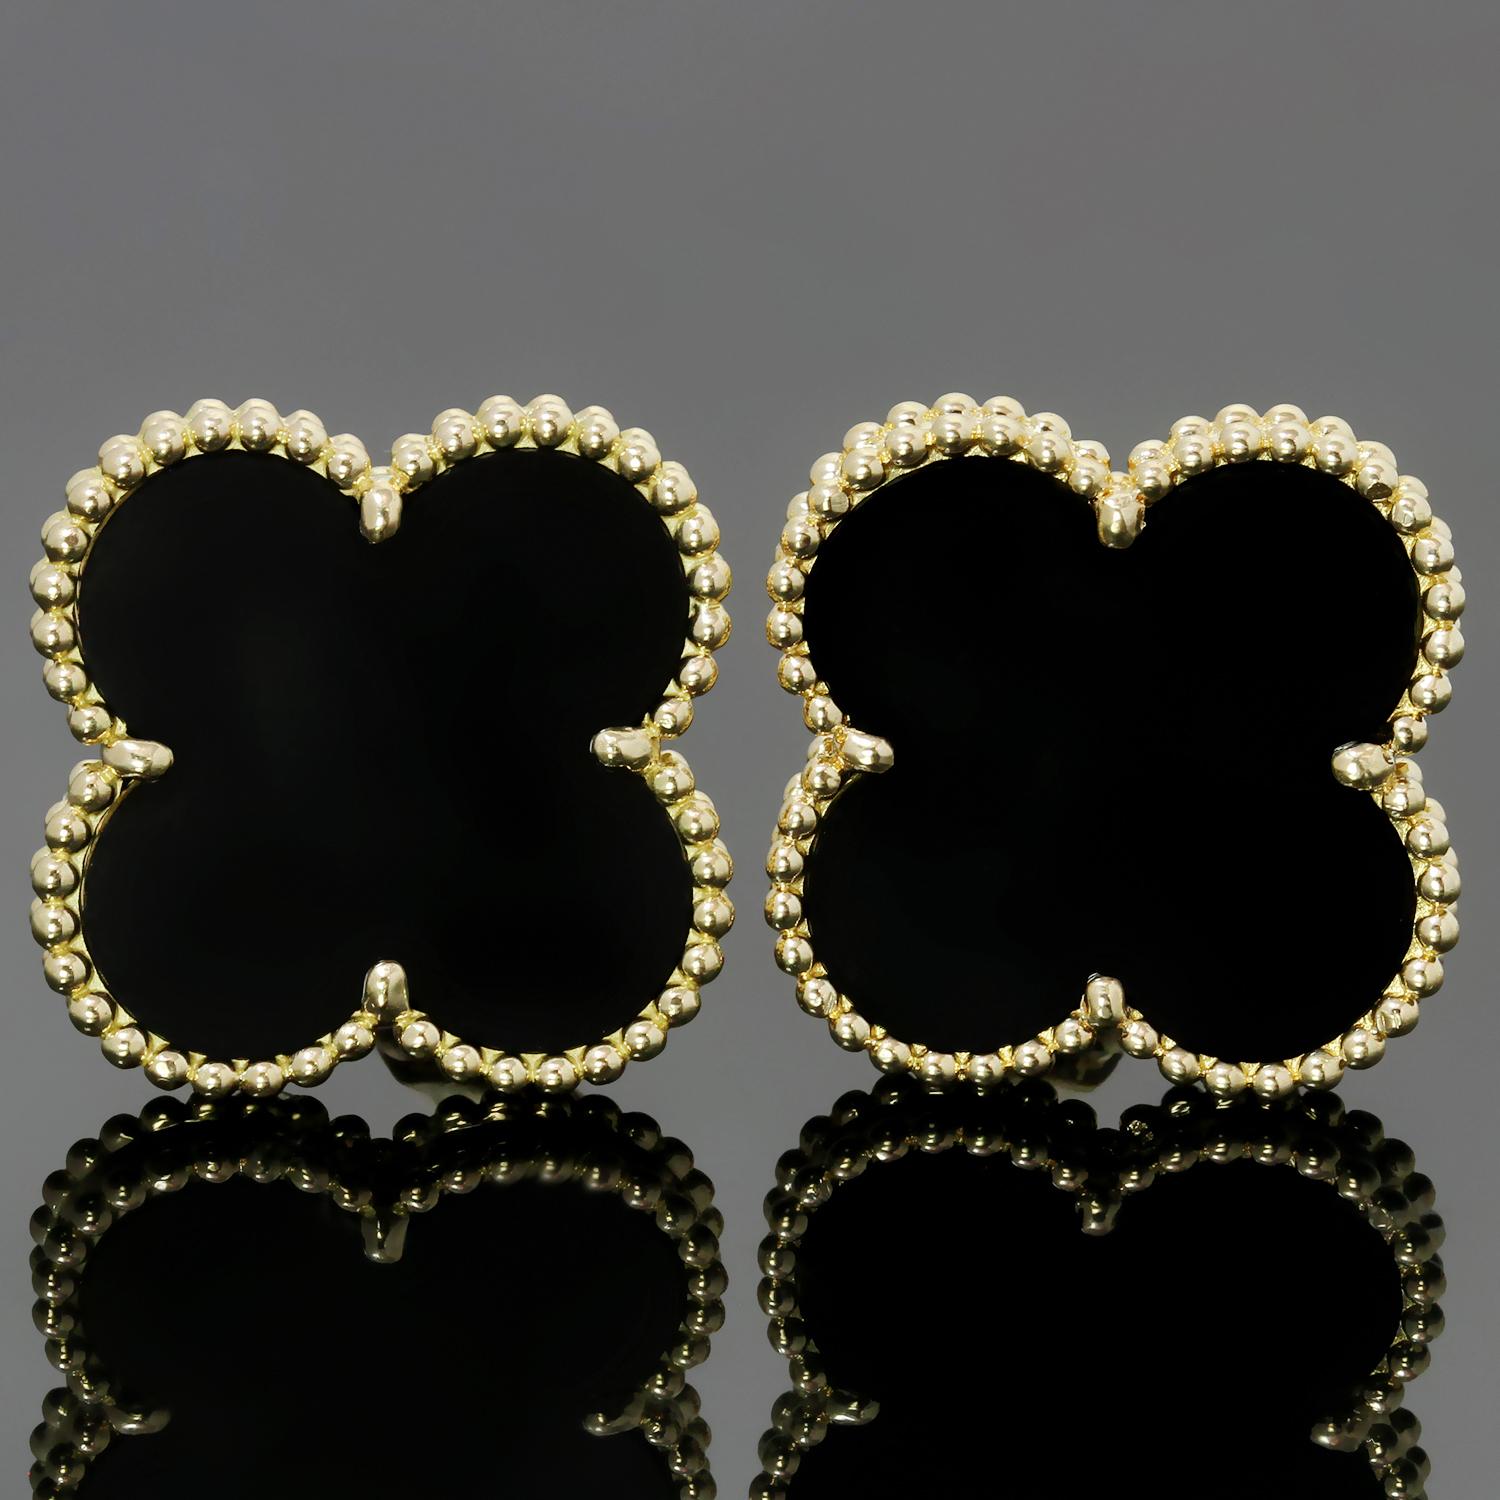 These elegant Van Cleef & Arpels drop earrings from the Magic Alhambra collection are crafted in 18k yellow gold and feature a pair of lucky clover motifs inlaid with black onyx round bead settings. Made in France circa 2012. Measurements: 0.78